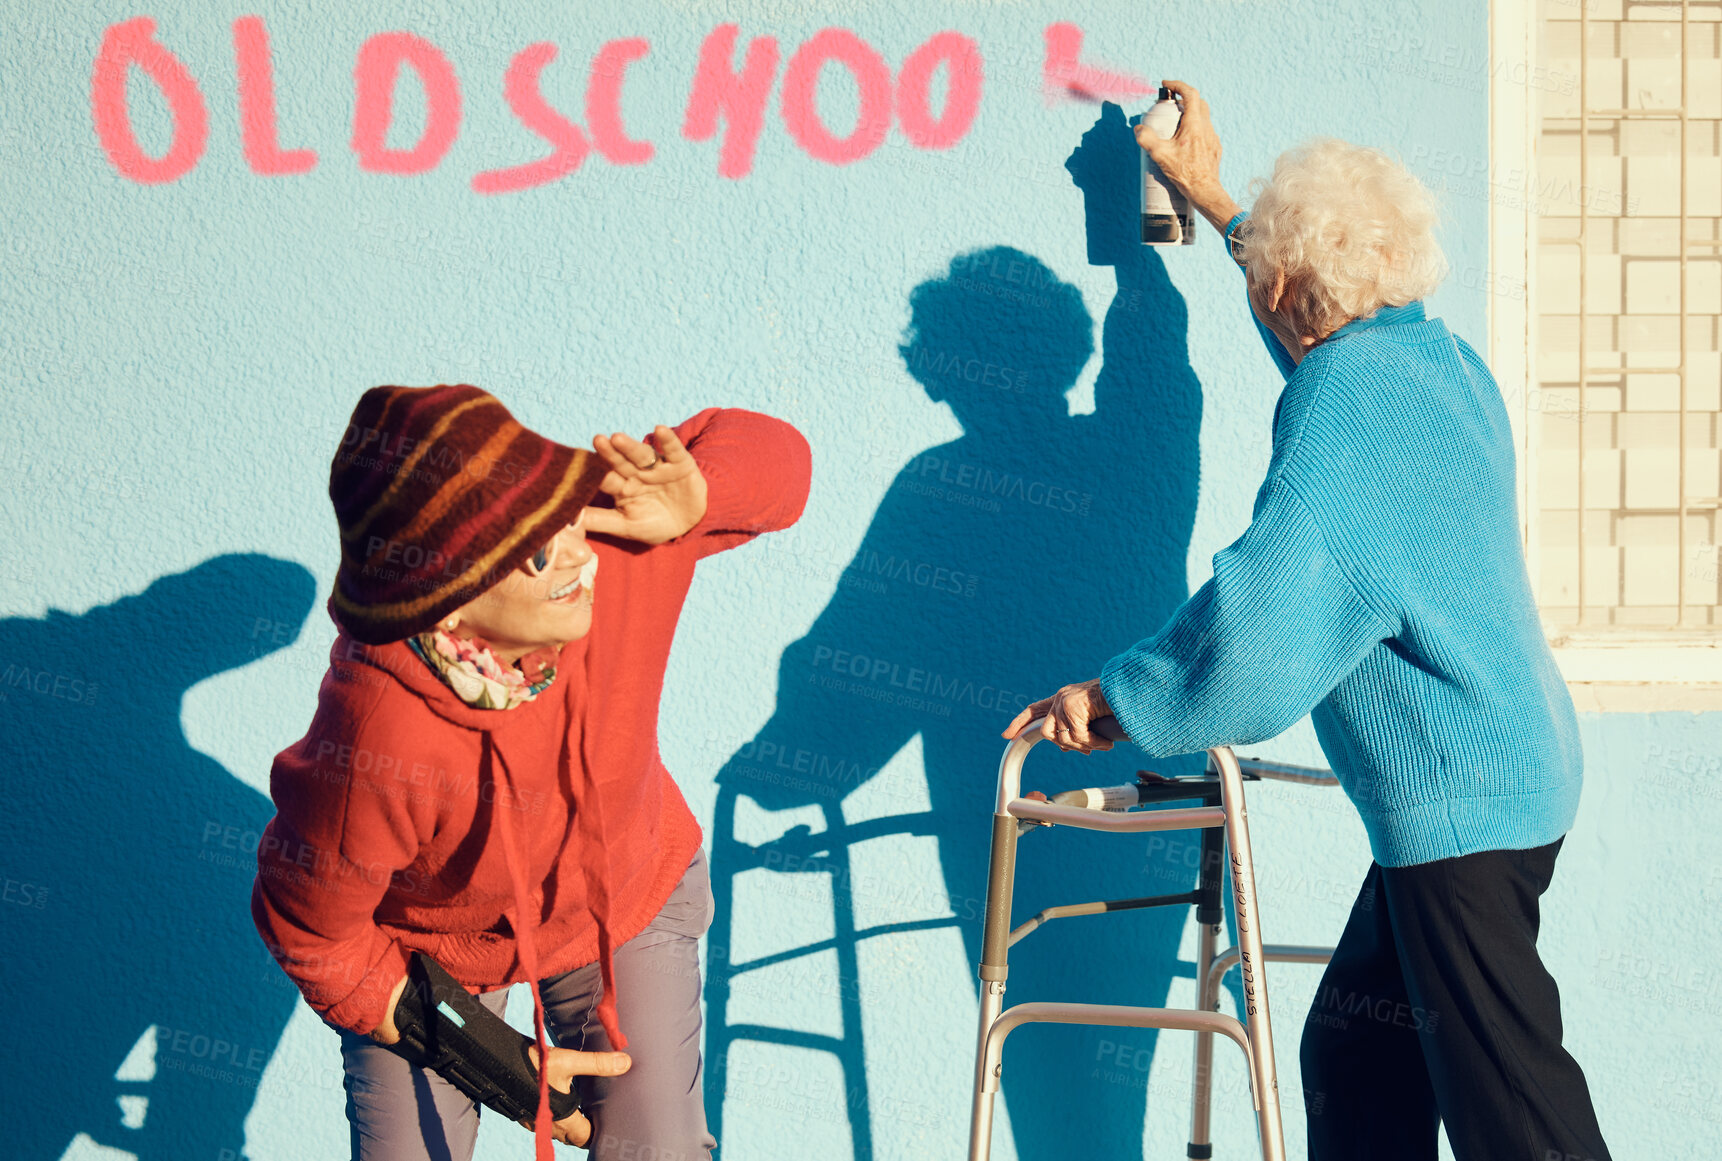 Buy stock photo Senior women, friends and spray paint for vandalism, graffiti and street art to spray old school on nursing home building wall and keep watch. Crazy old people break law with illegal activity outdoor